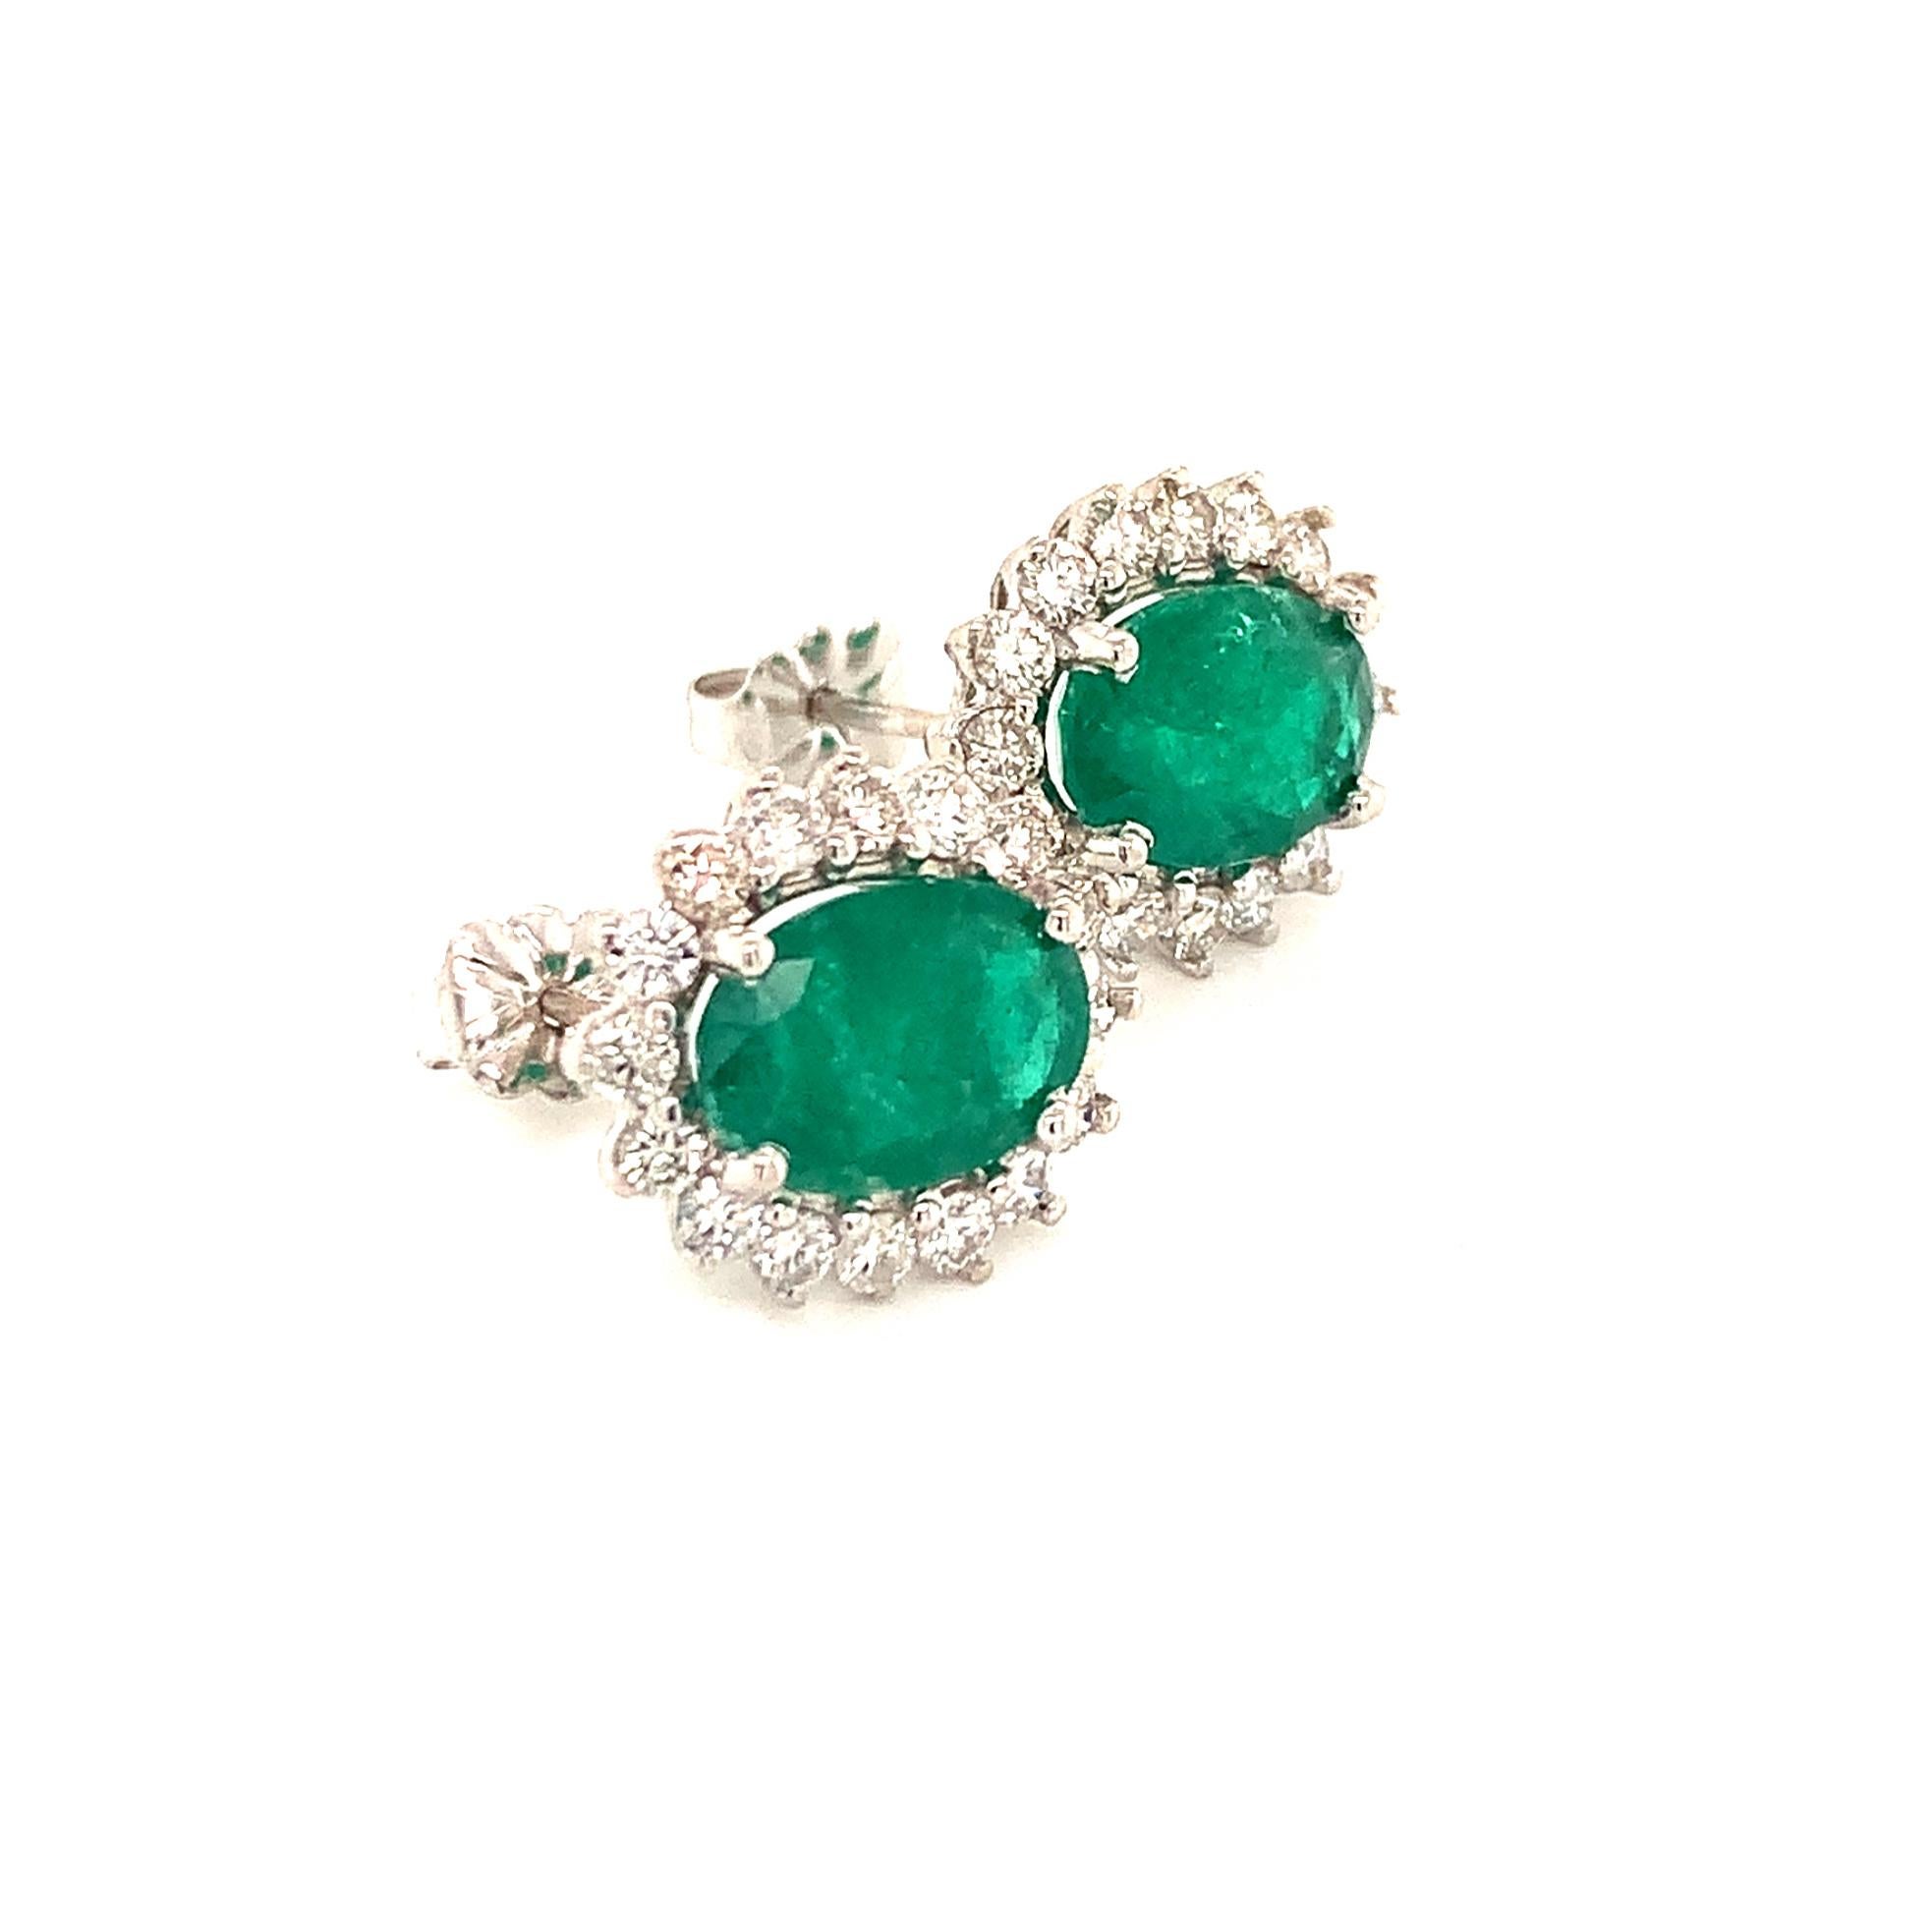 Natural Emerald Diamond Earrings 14k Gold 5.03 TCW Certified For Sale 1